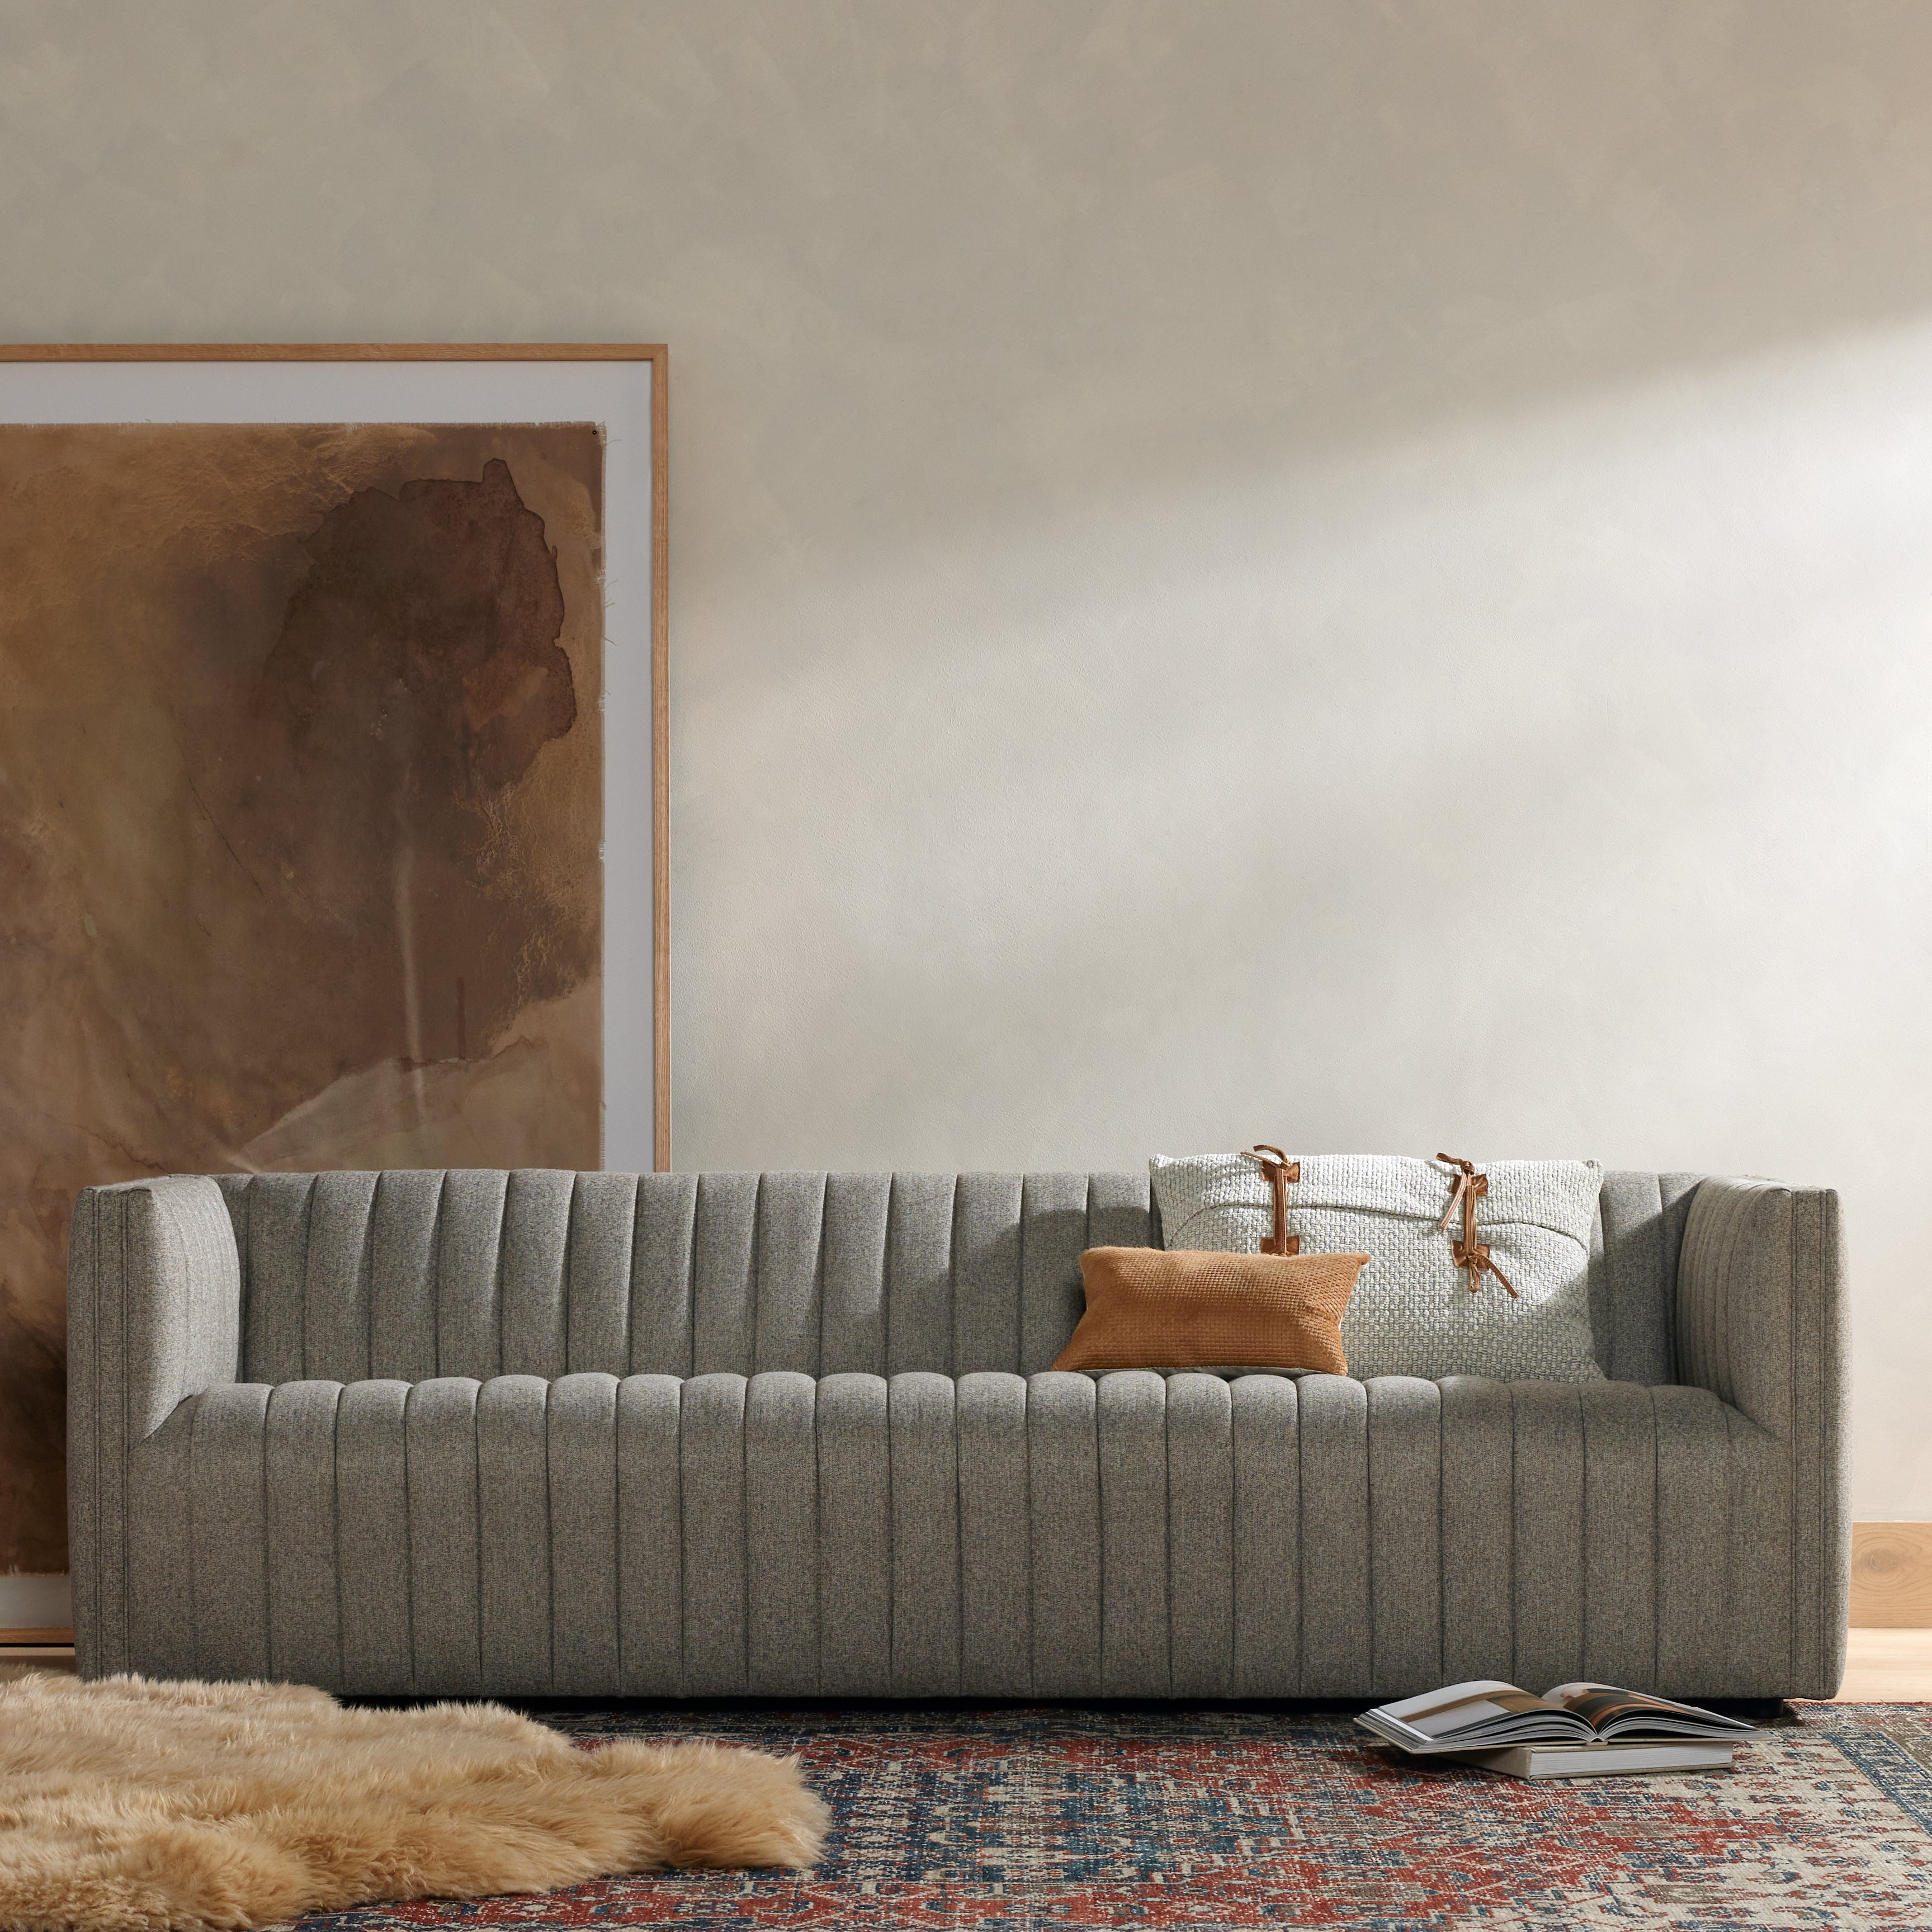 A dramatically channeled sofa with textural grey upholstery offers a clean look inspired by modern menswear. Amethyst Home provides interior design, new construction, custom furniture, and area rugs in the Omaha metro area.